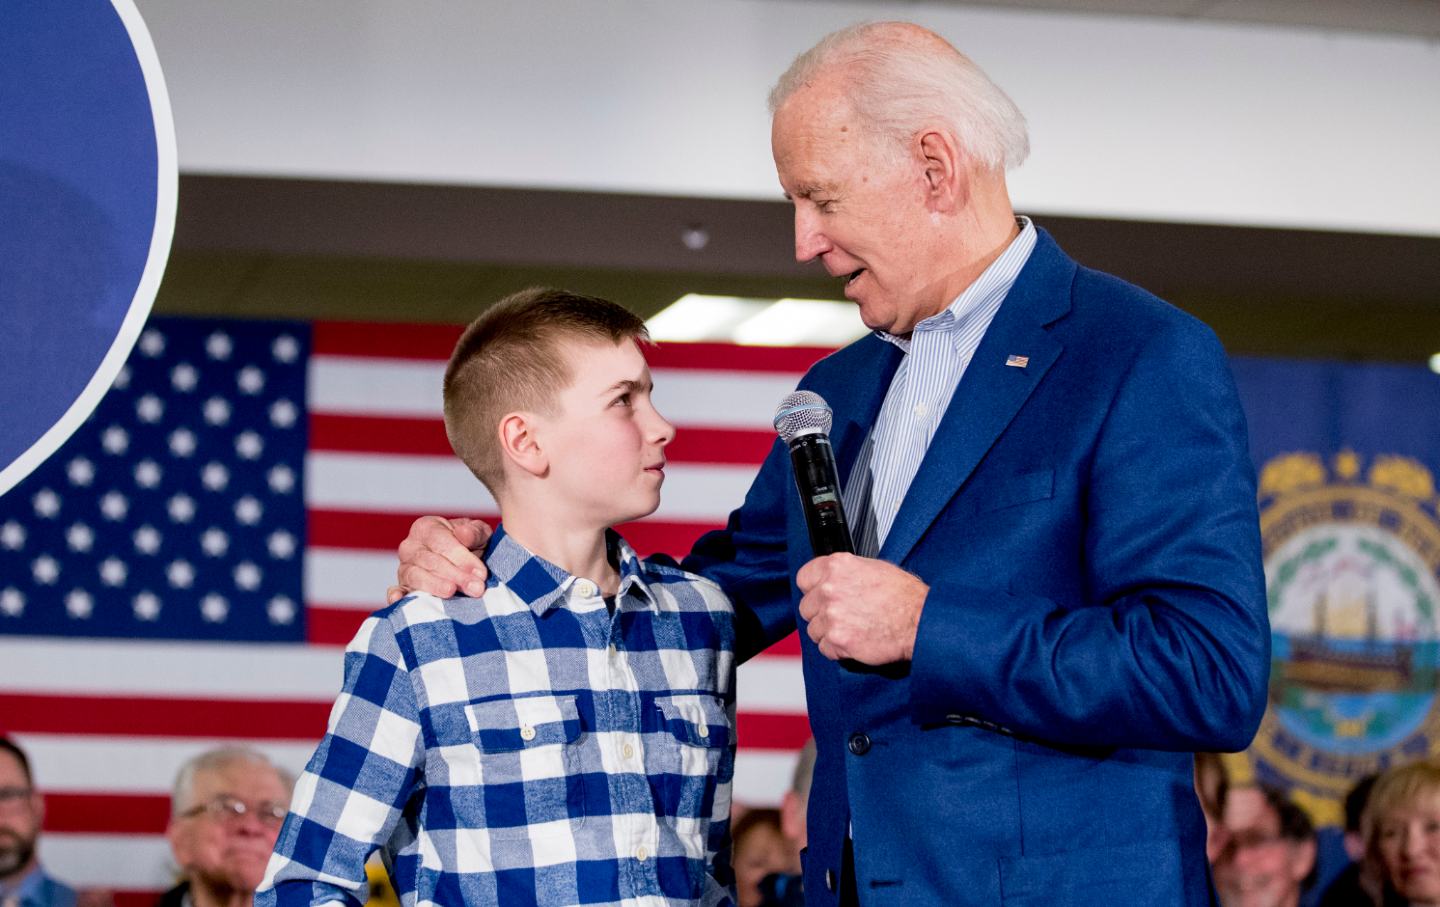 12 year-old Brayden Harrington stands on stage with Joe Biden at a campaign rally